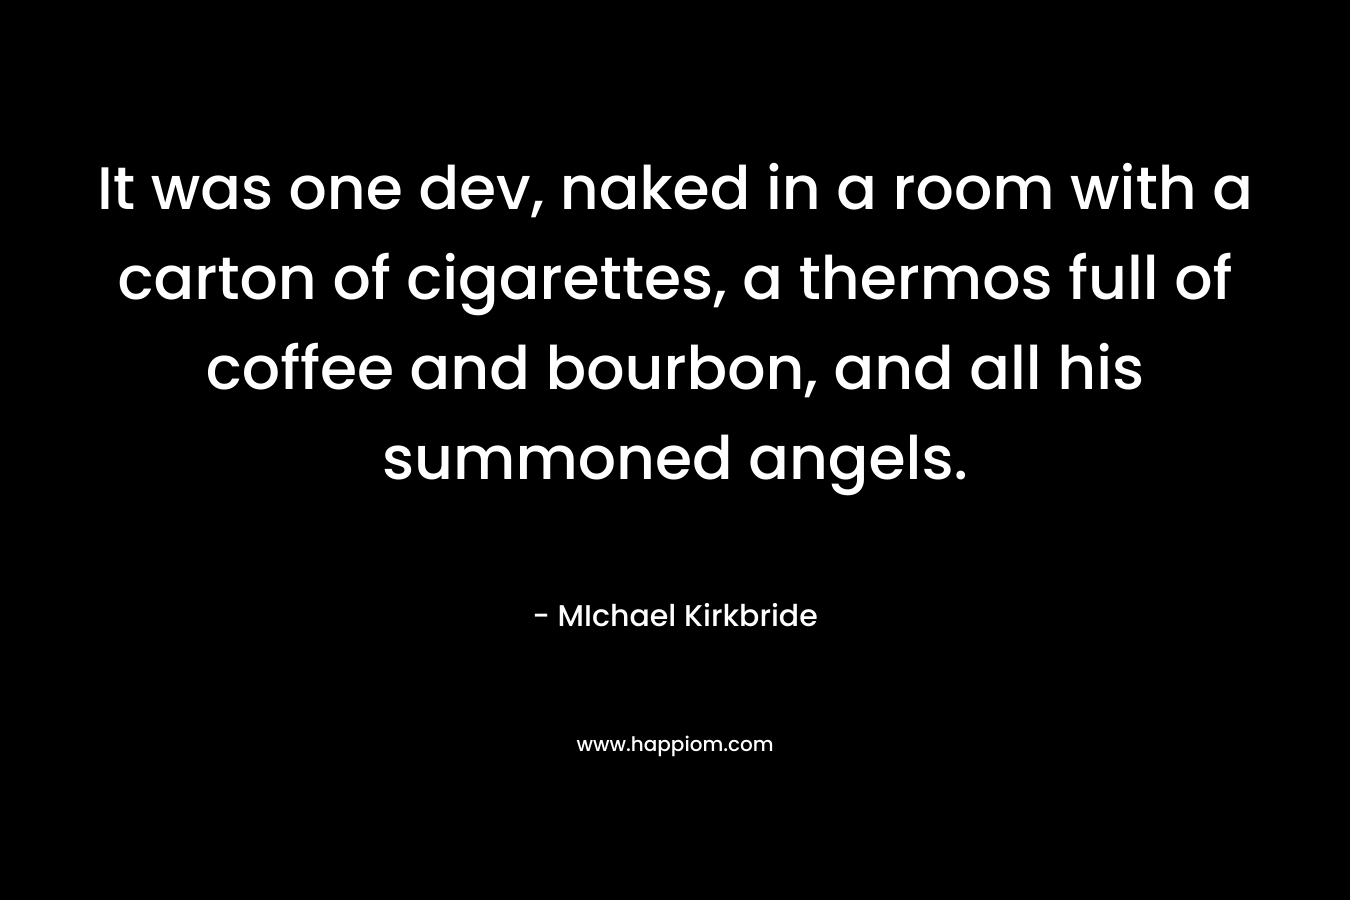 It was one dev, naked in a room with a carton of cigarettes, a thermos full of coffee and bourbon, and all his summoned angels. – MIchael Kirkbride